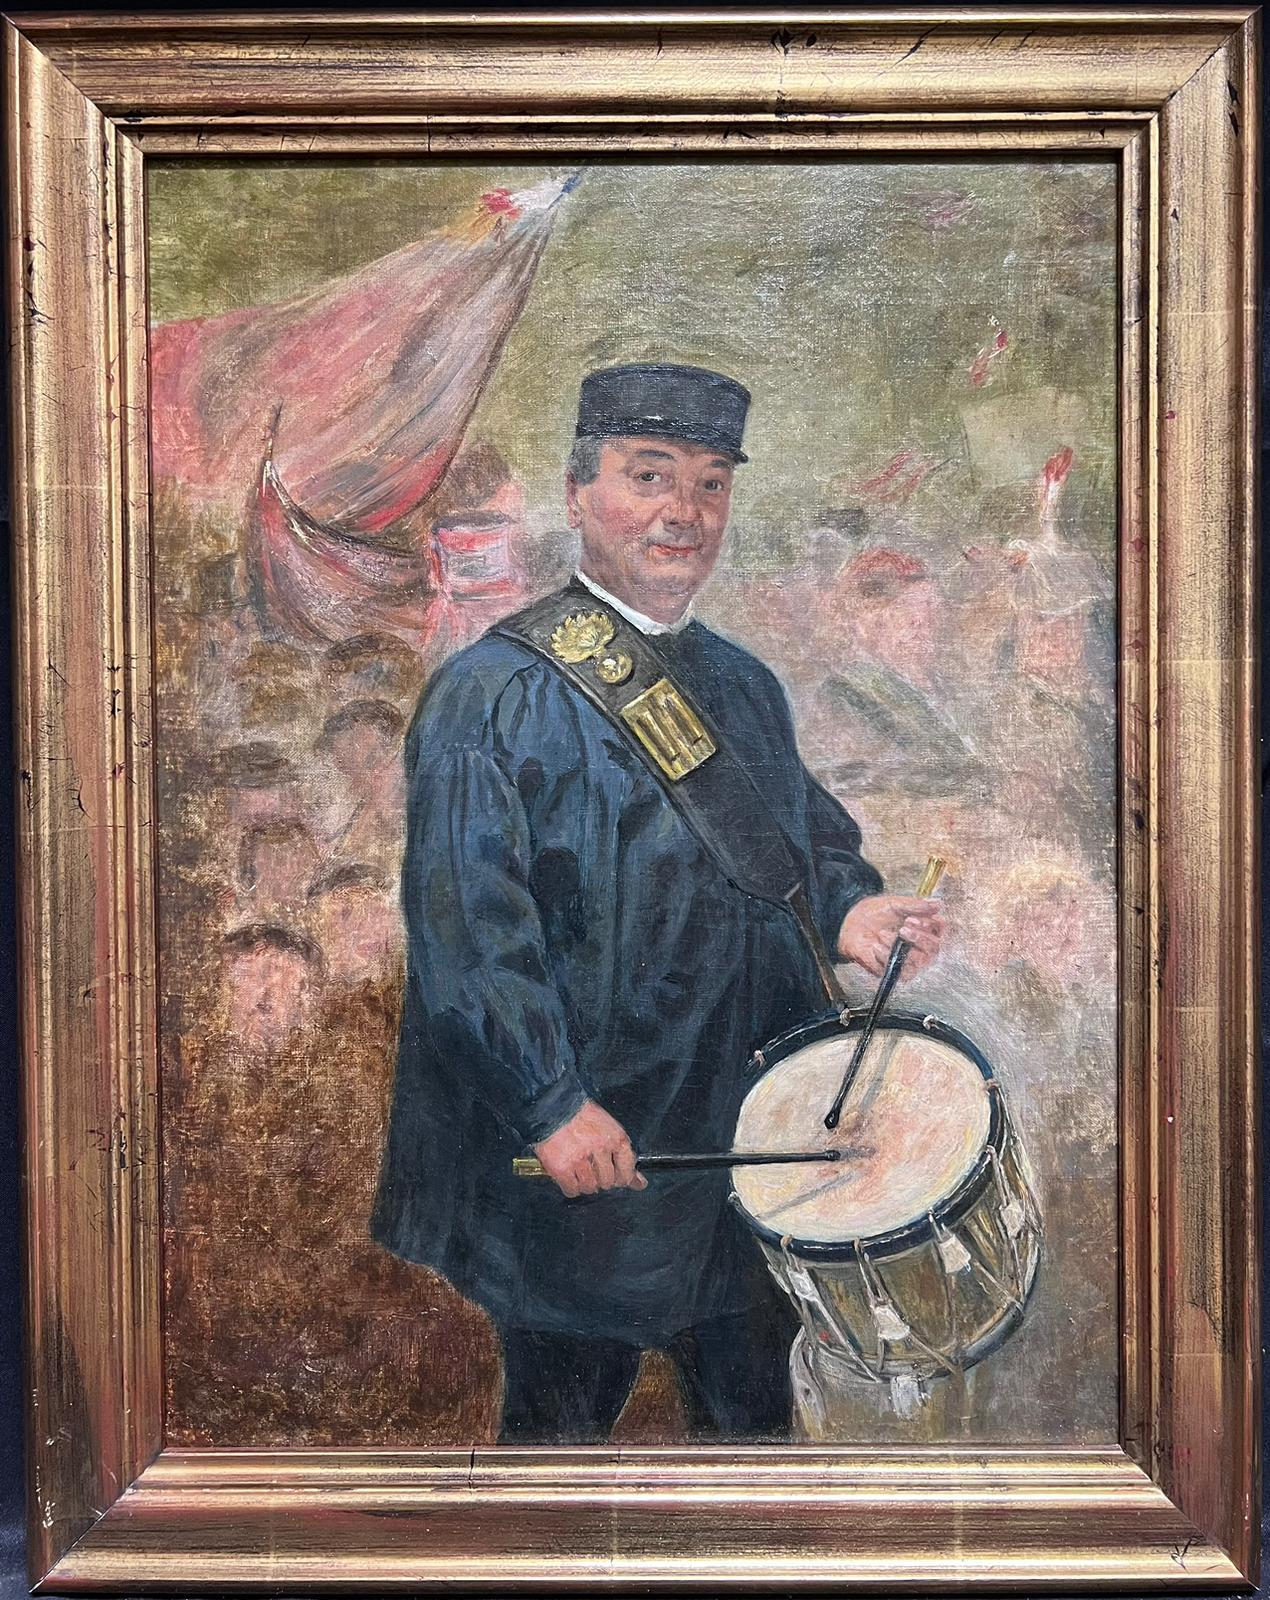 Antique French Post-Impressionist Oil Painting Portrait of Drummer Large Canvas - Gray Portrait Painting by French School